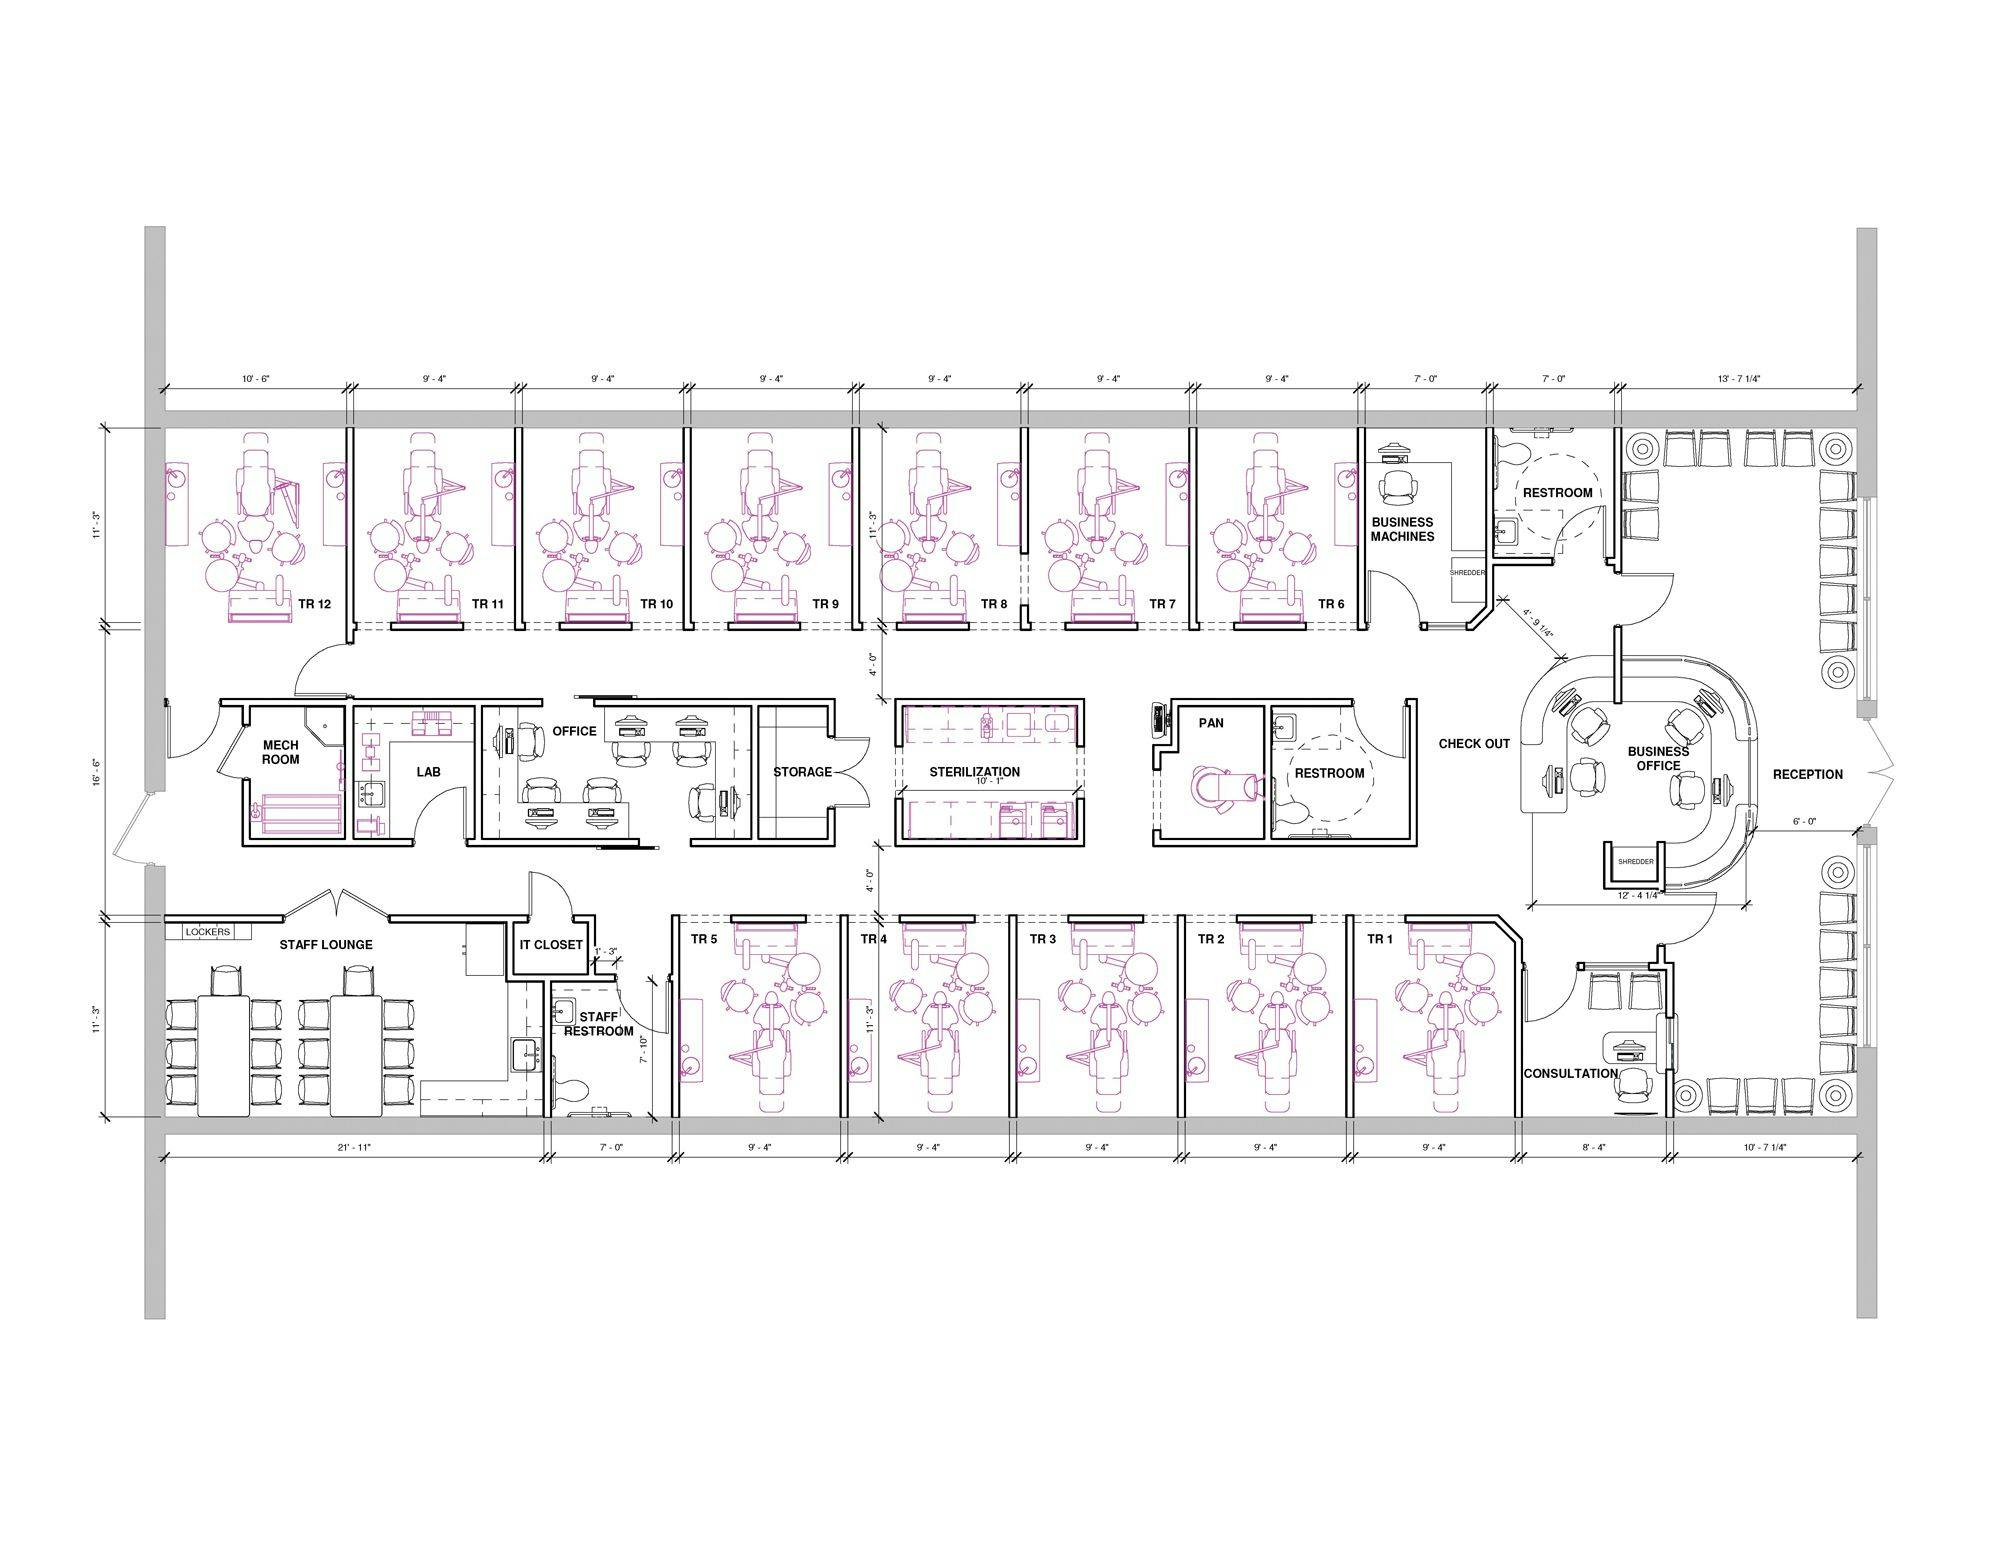  An important aspect of practice design, the floor plan assists in boosting a practice’s draw to patients. It takes a keen eye to understand the flow of practice design, and virtual floor plans—such as this one crafted by King’s team at Patterson Dental—can help visualize the best fit for the practice. 